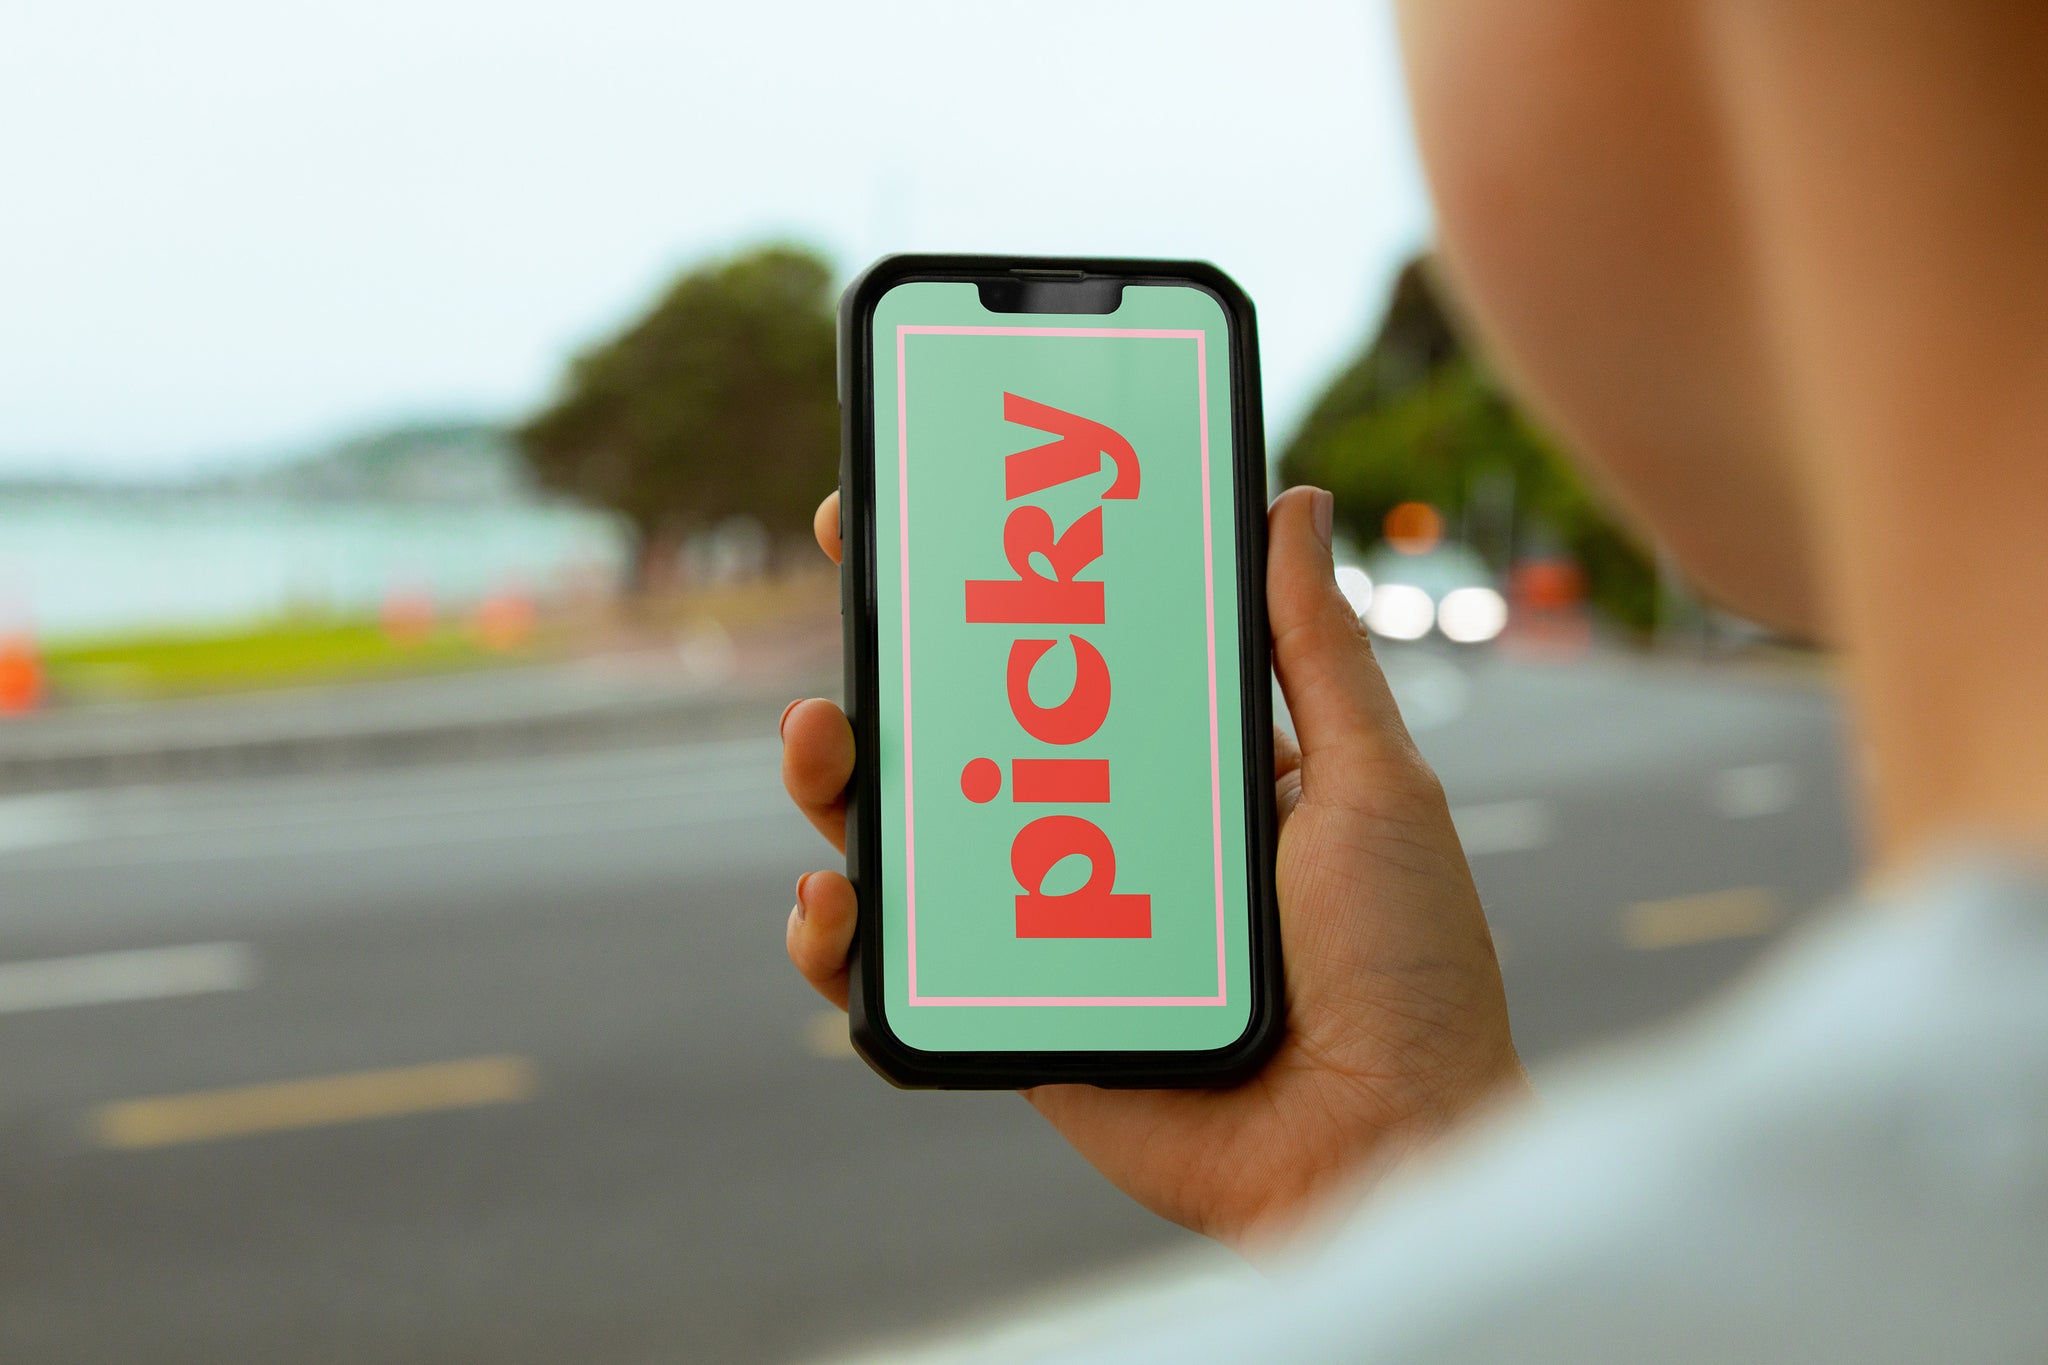 Over the shoulder shot of man holding phone up right. Picky logo vertically doiwn the green screen. Background is of a coastal road with ocean in far background. 